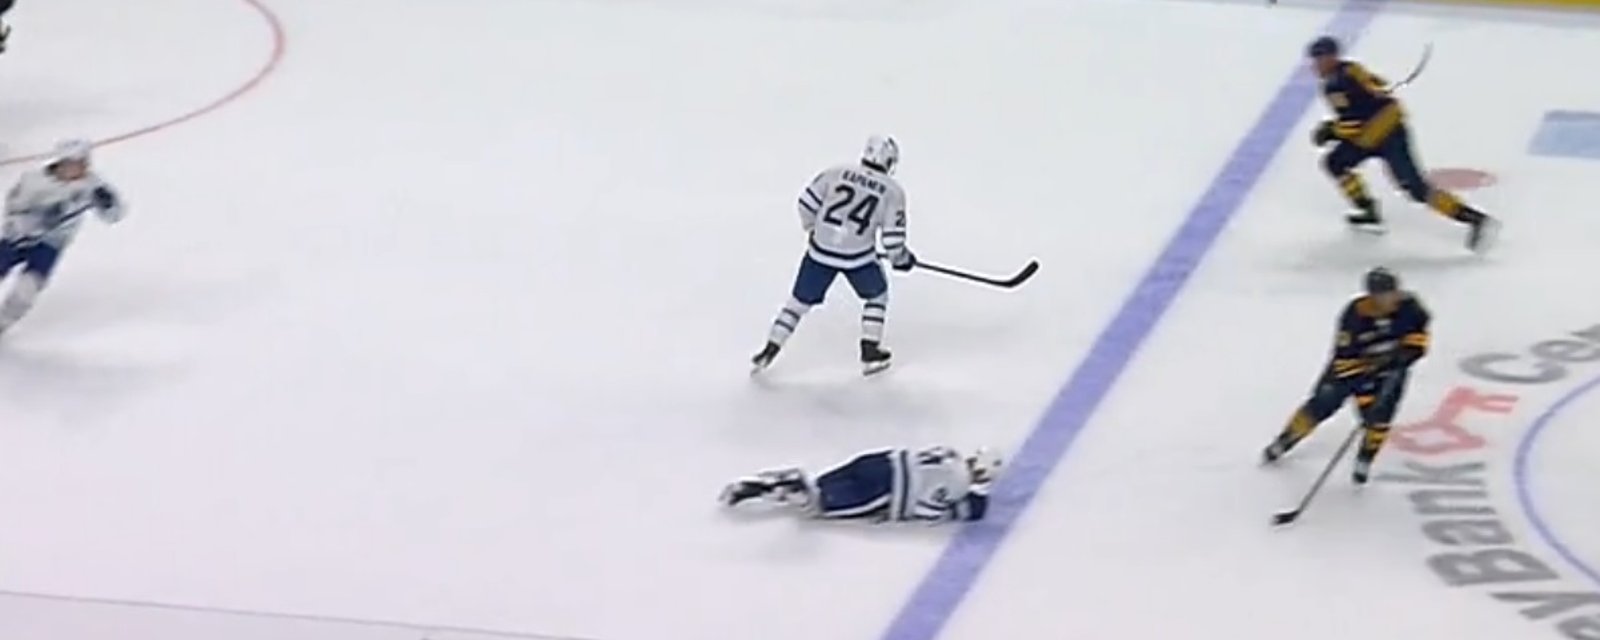 Rasmus Ristolainen drops Tyson Barrie with a questionable hit.